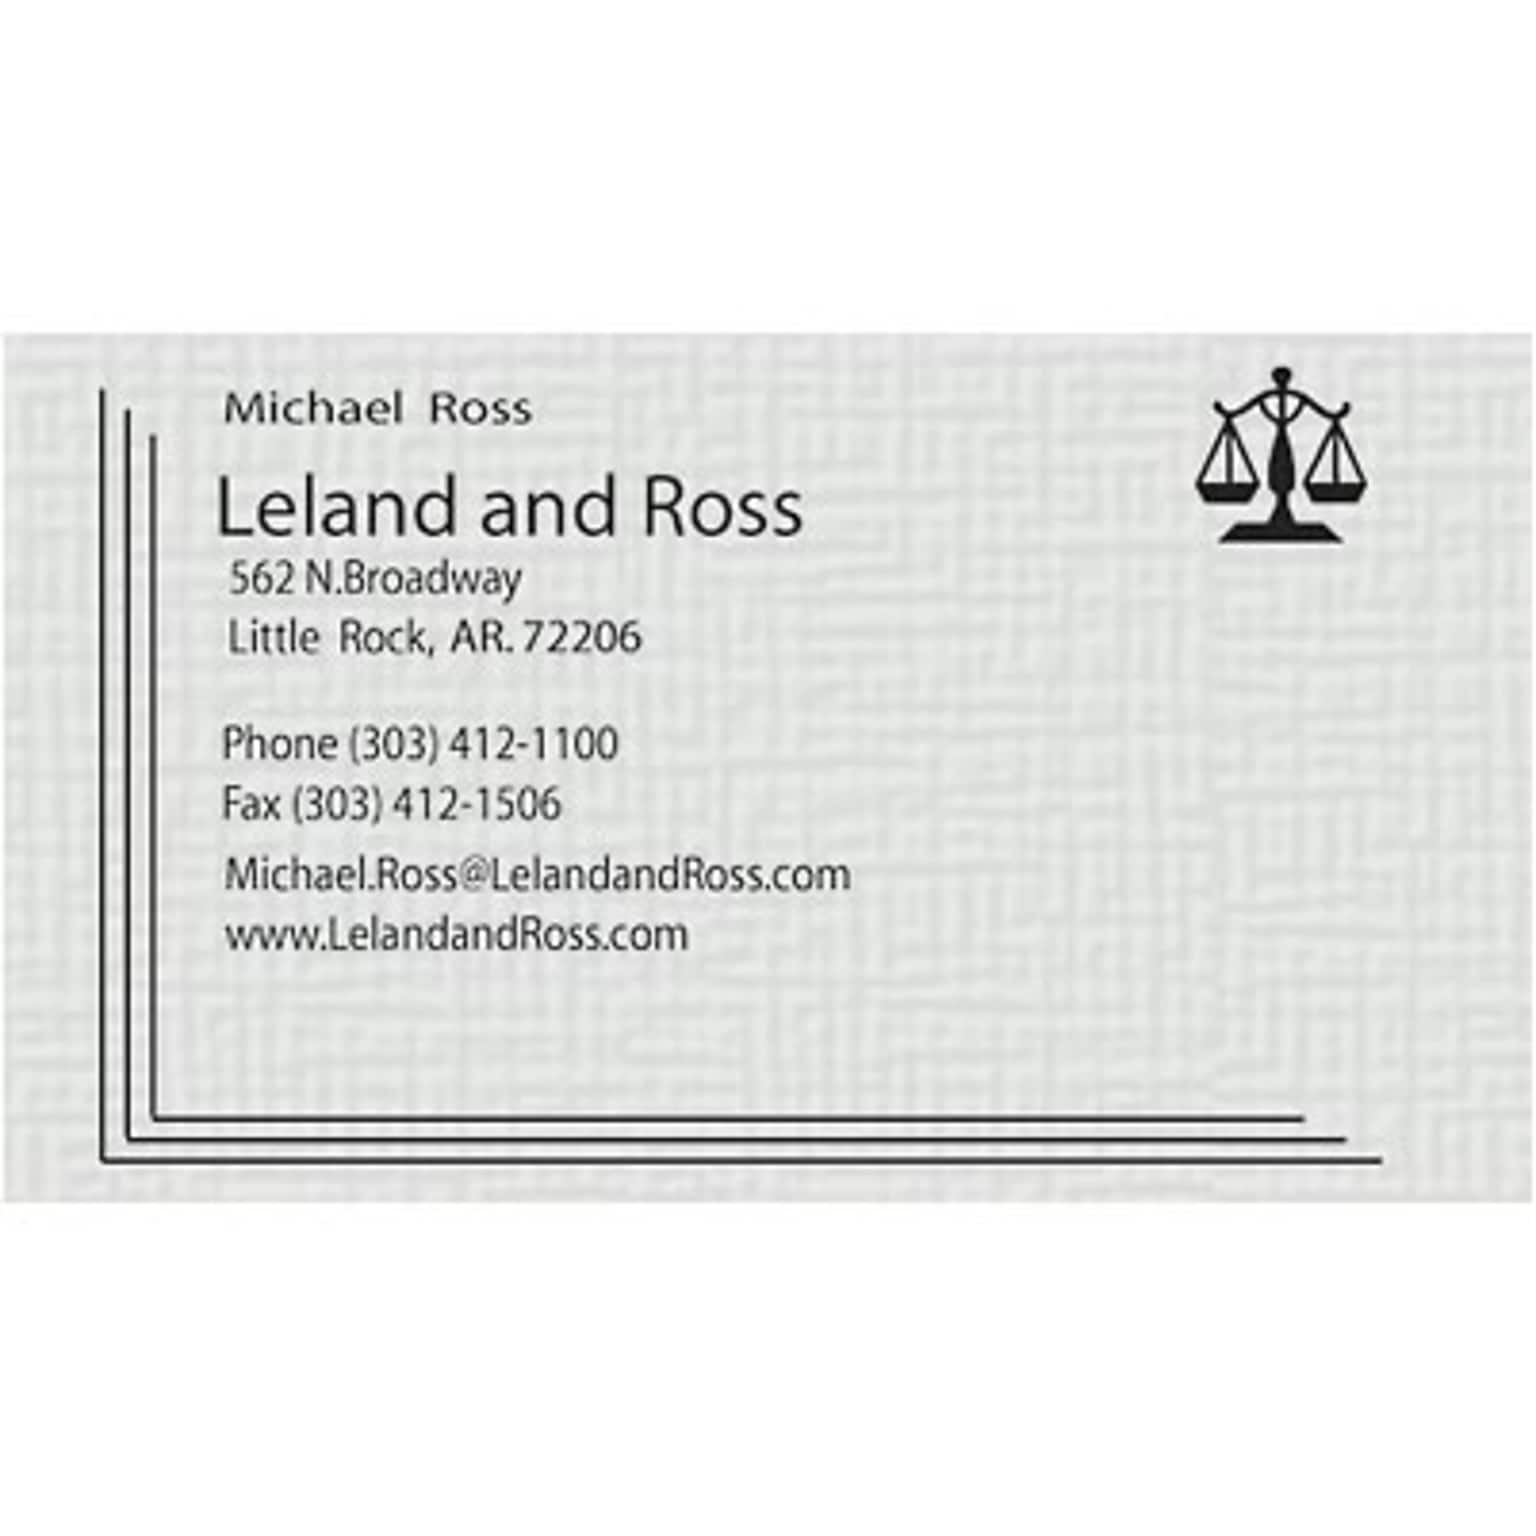 Custom 1-2 Color Business Cards, CLASSIC CREST® Smooth Antique Gray 80#, Raised Print, 1 Standard Ink, 1-Sided, 250/PK